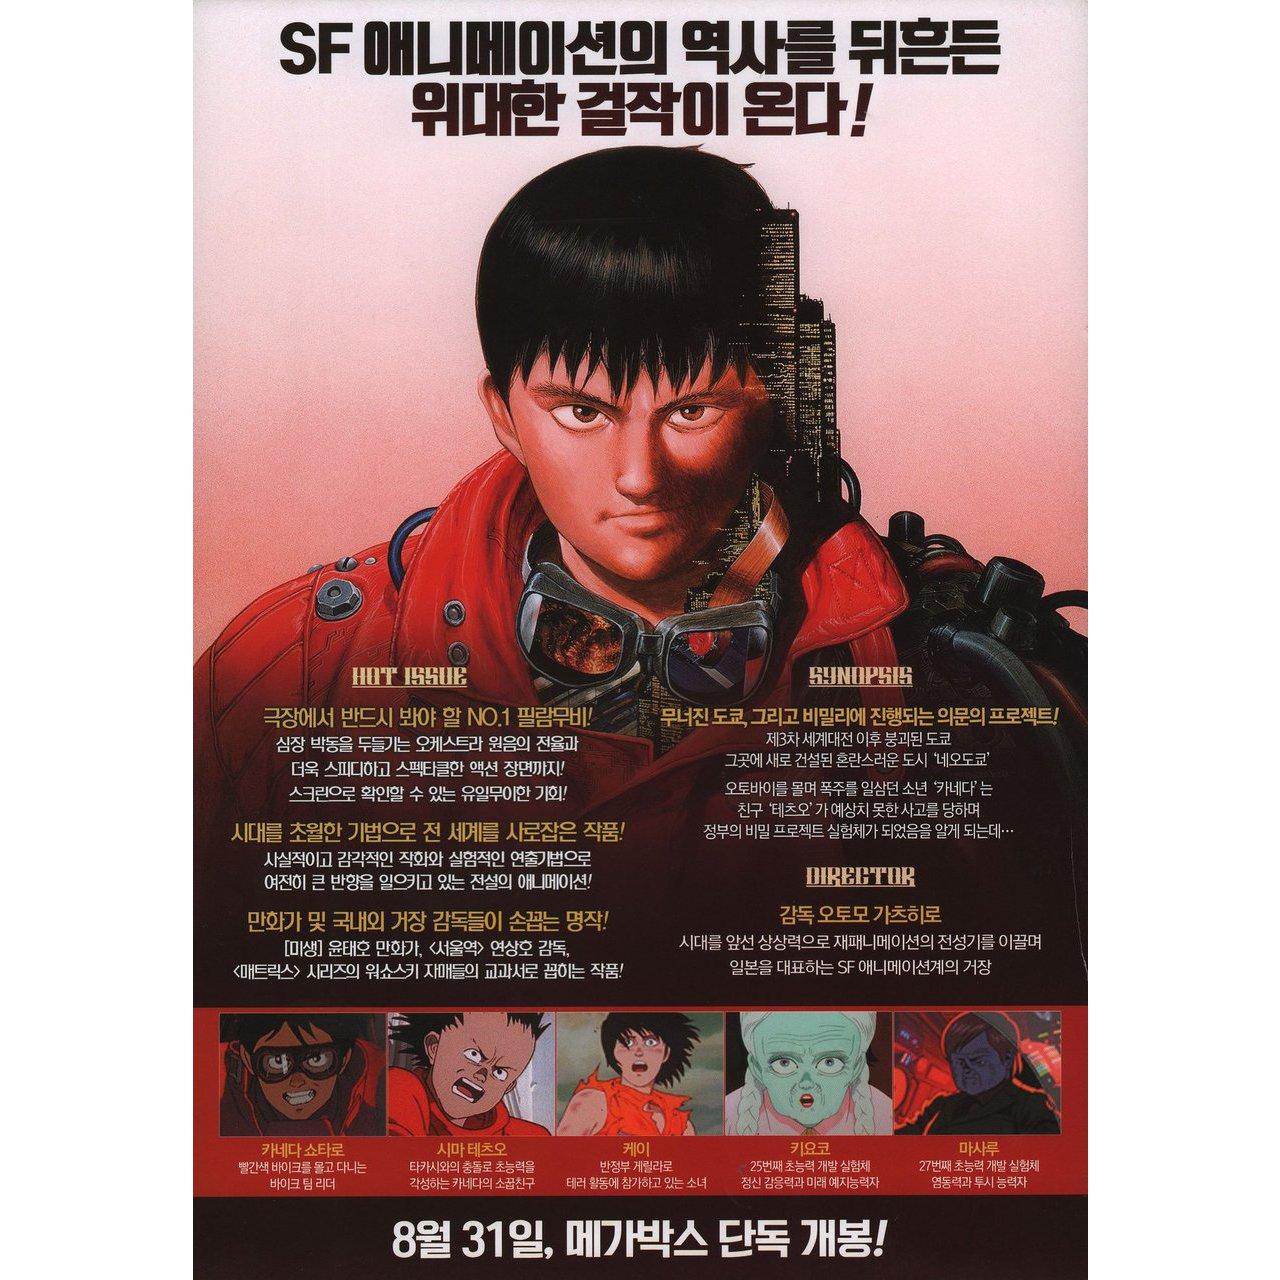 Original 1988 South Korean A4 mini poster for the film ‘Akira’ directed by Katsuhiro Ohtomo with Mitsuo Iwata / Nozomu Sasaki / Mami Koyama / Tessho Genda. Fine condition, rolled. Please note: the size is stated in inches and the actual size can